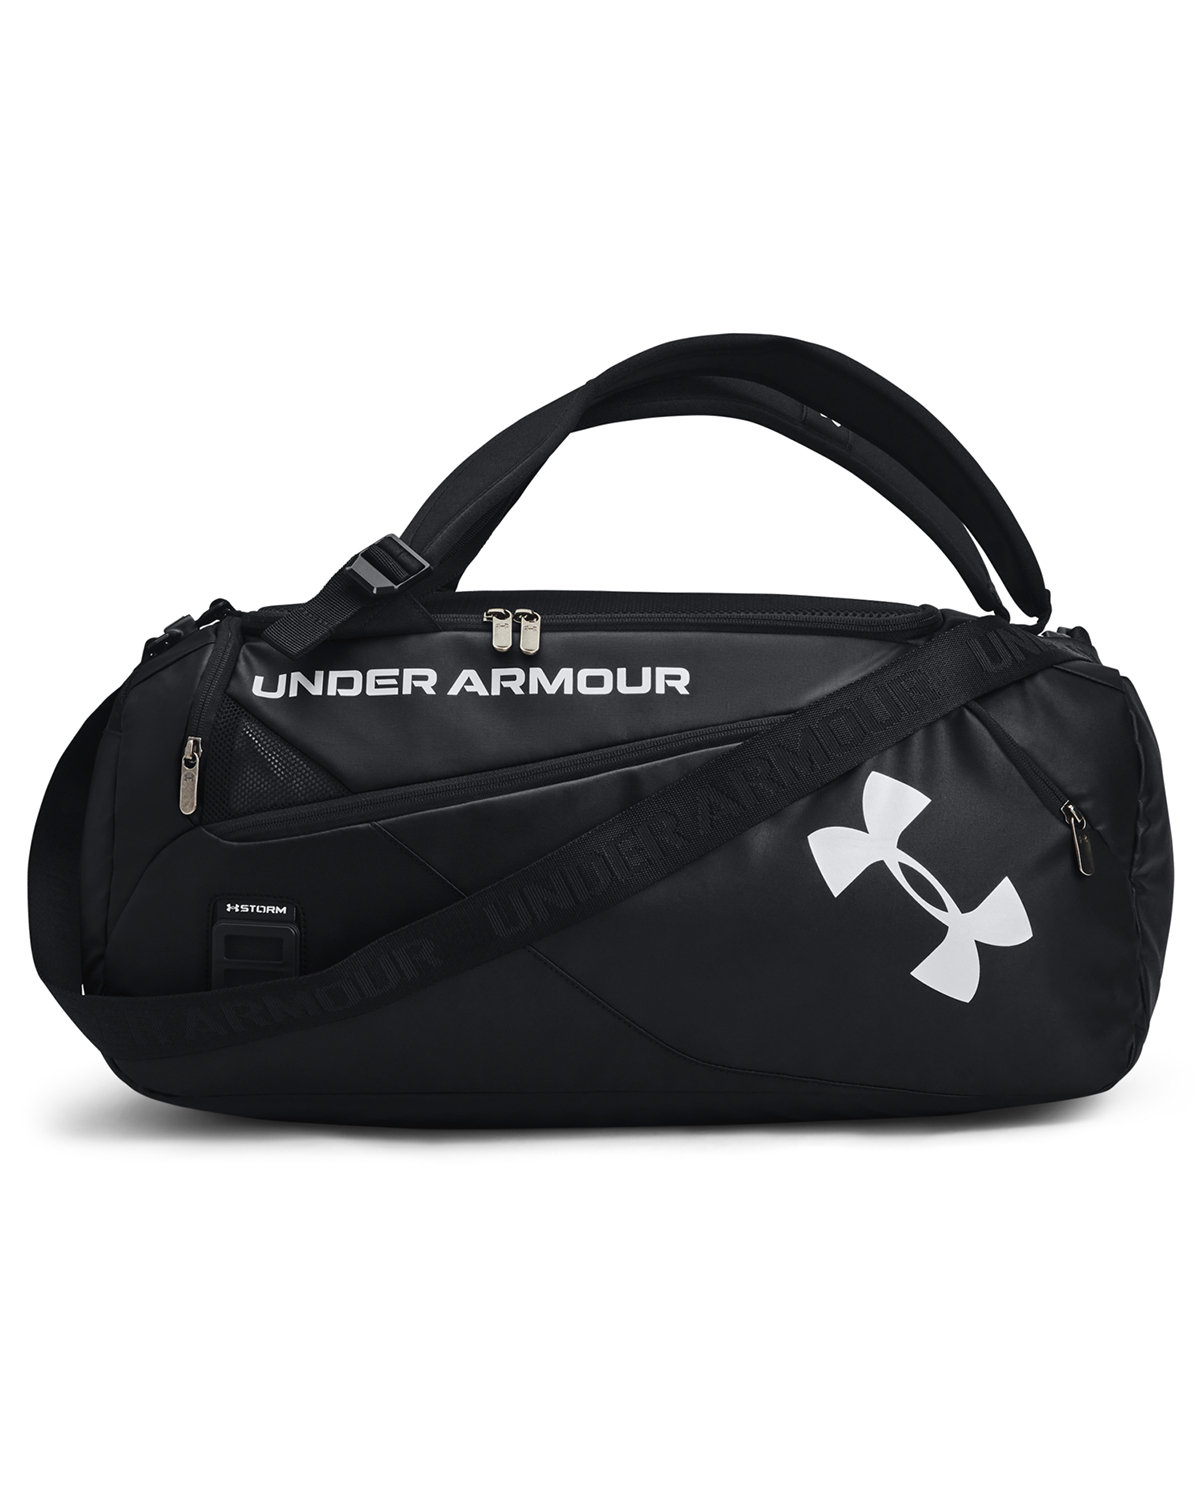 Under Armour 1361225 - Contain Duffel Small